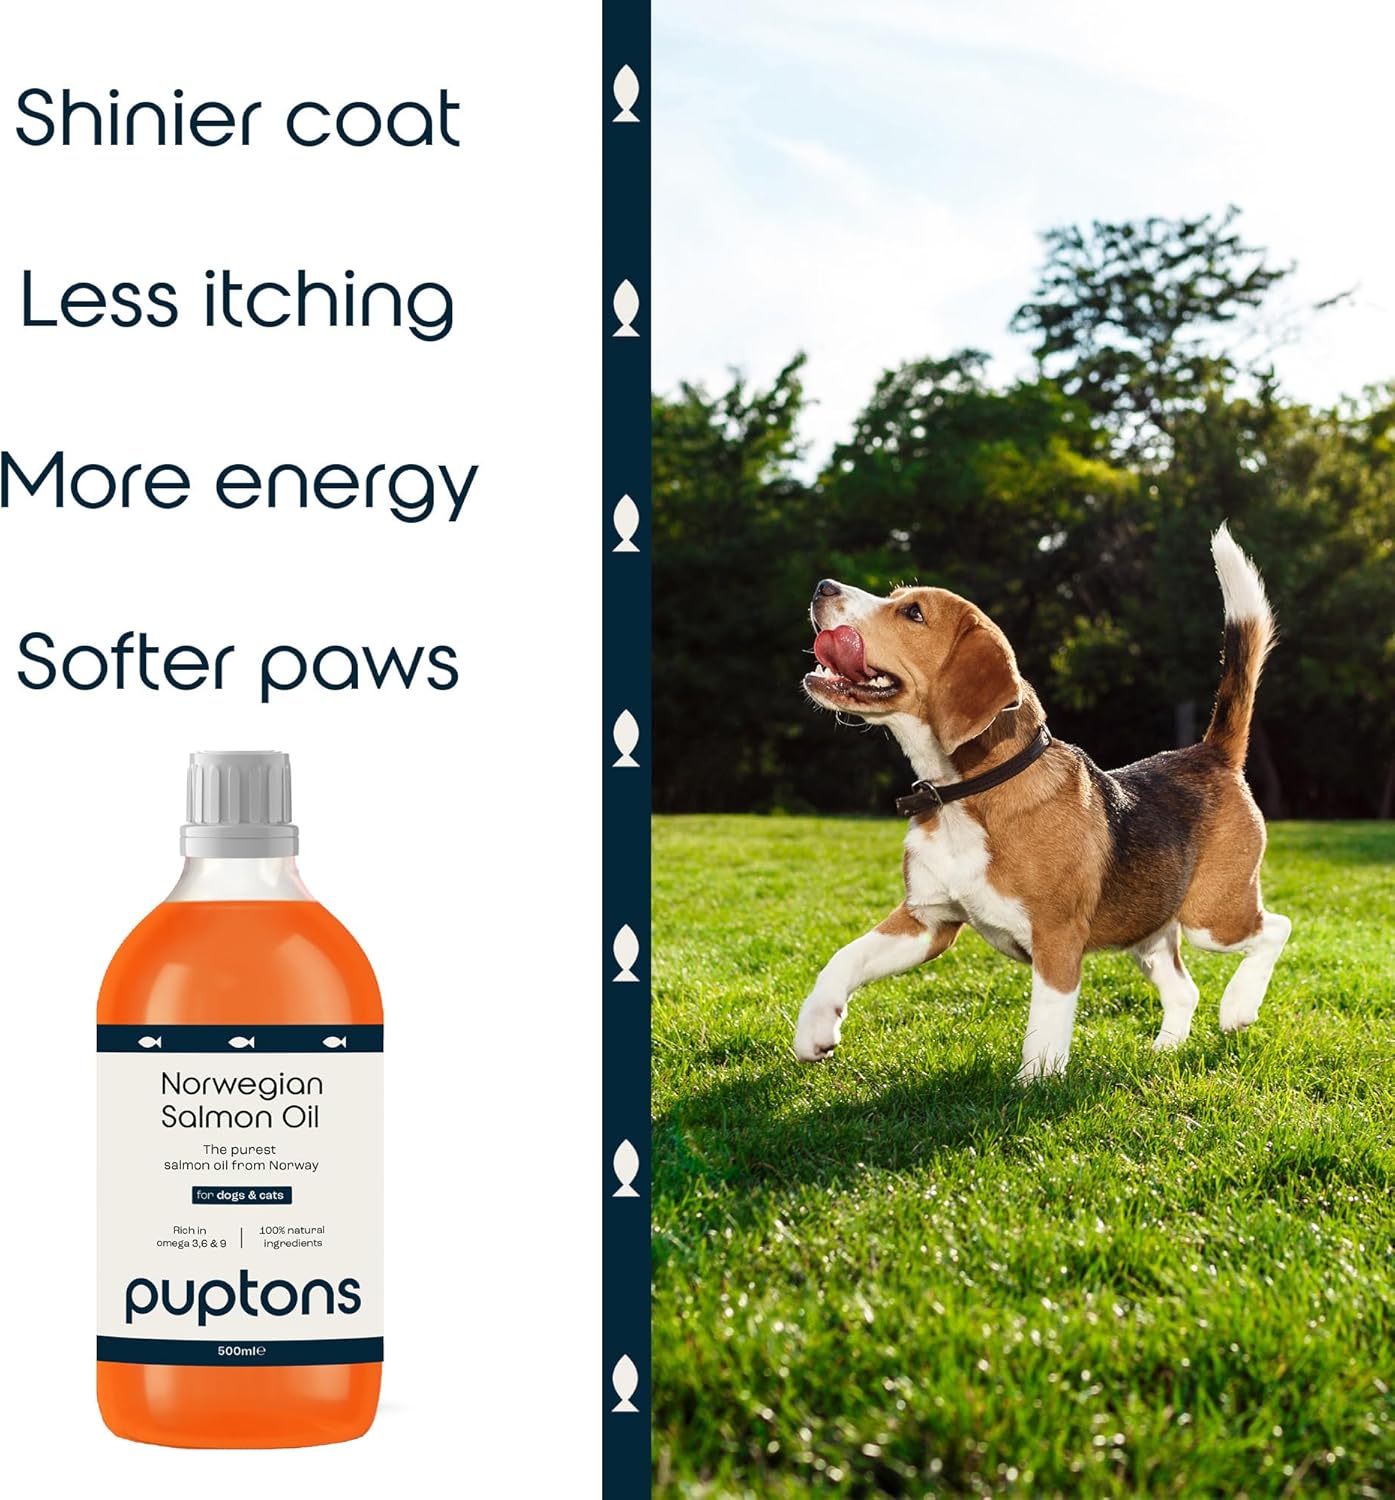 Salmon Oil for Dogs, Cats & Pets | 500ml Norwegian Salmon Oil | Omega 3, 6 & 9 Fish Oil Supplement | Helps Itchy Skin, Joint Care, Skin & Coat, Soft Paws (500ml) :Pet Supplies